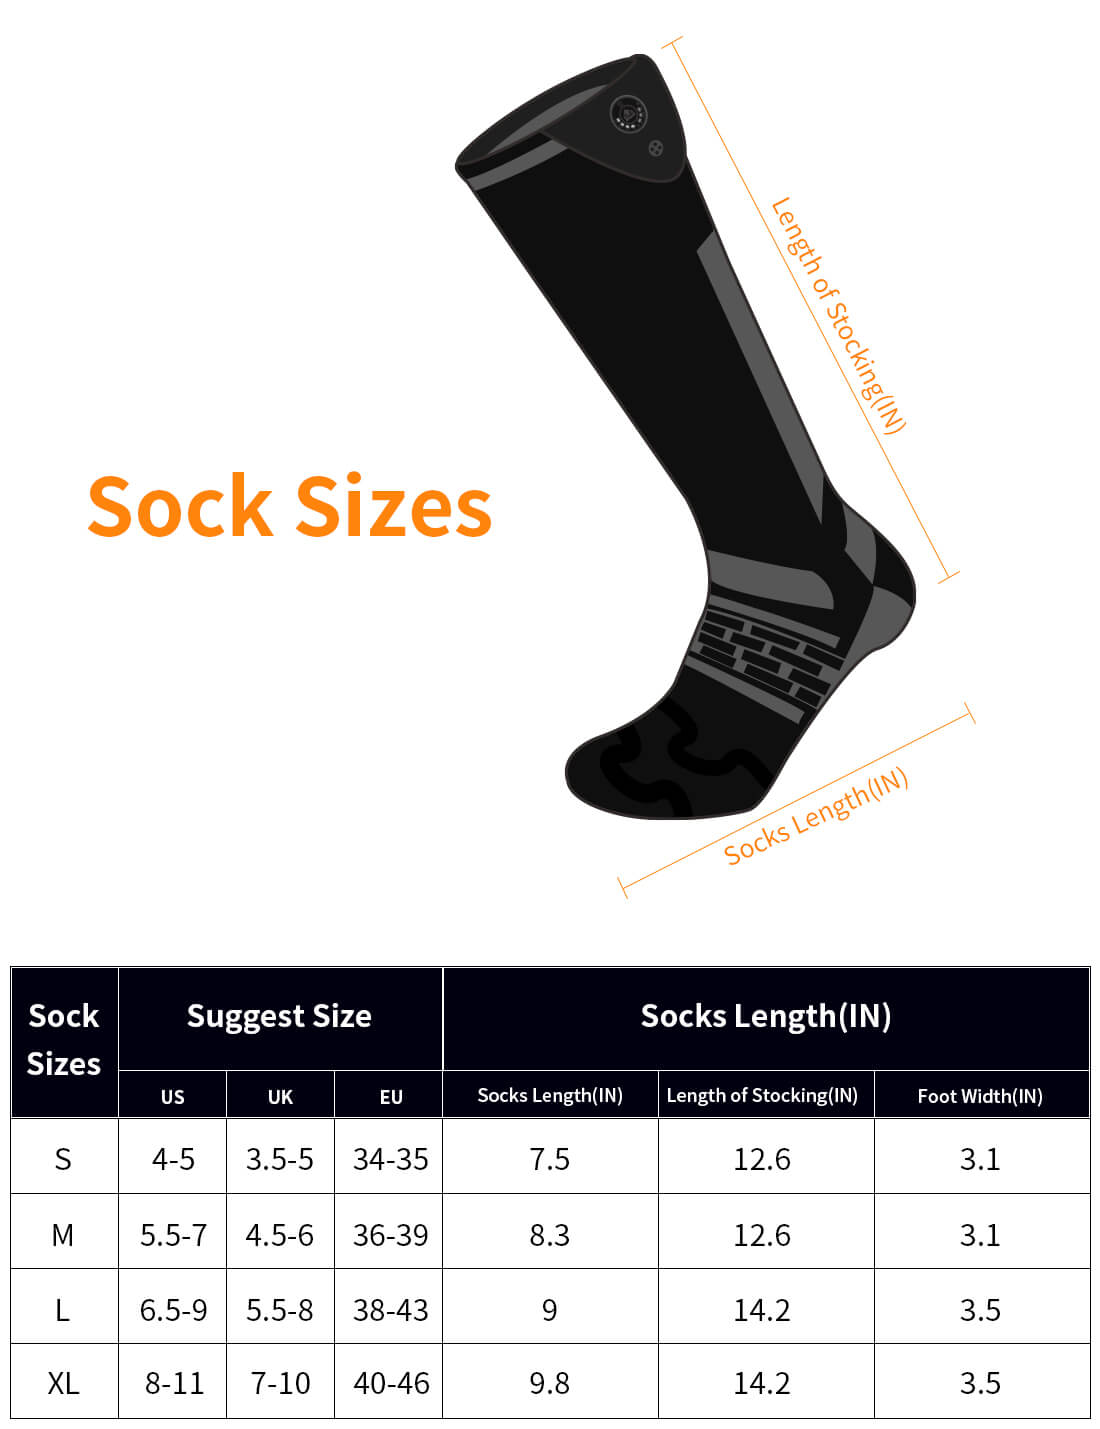 Bubbacare Heated Socks, Electric Socks with App Control, 3000mAh  Rechargeable Heated Socks for Men, Washable Heated Socks Women